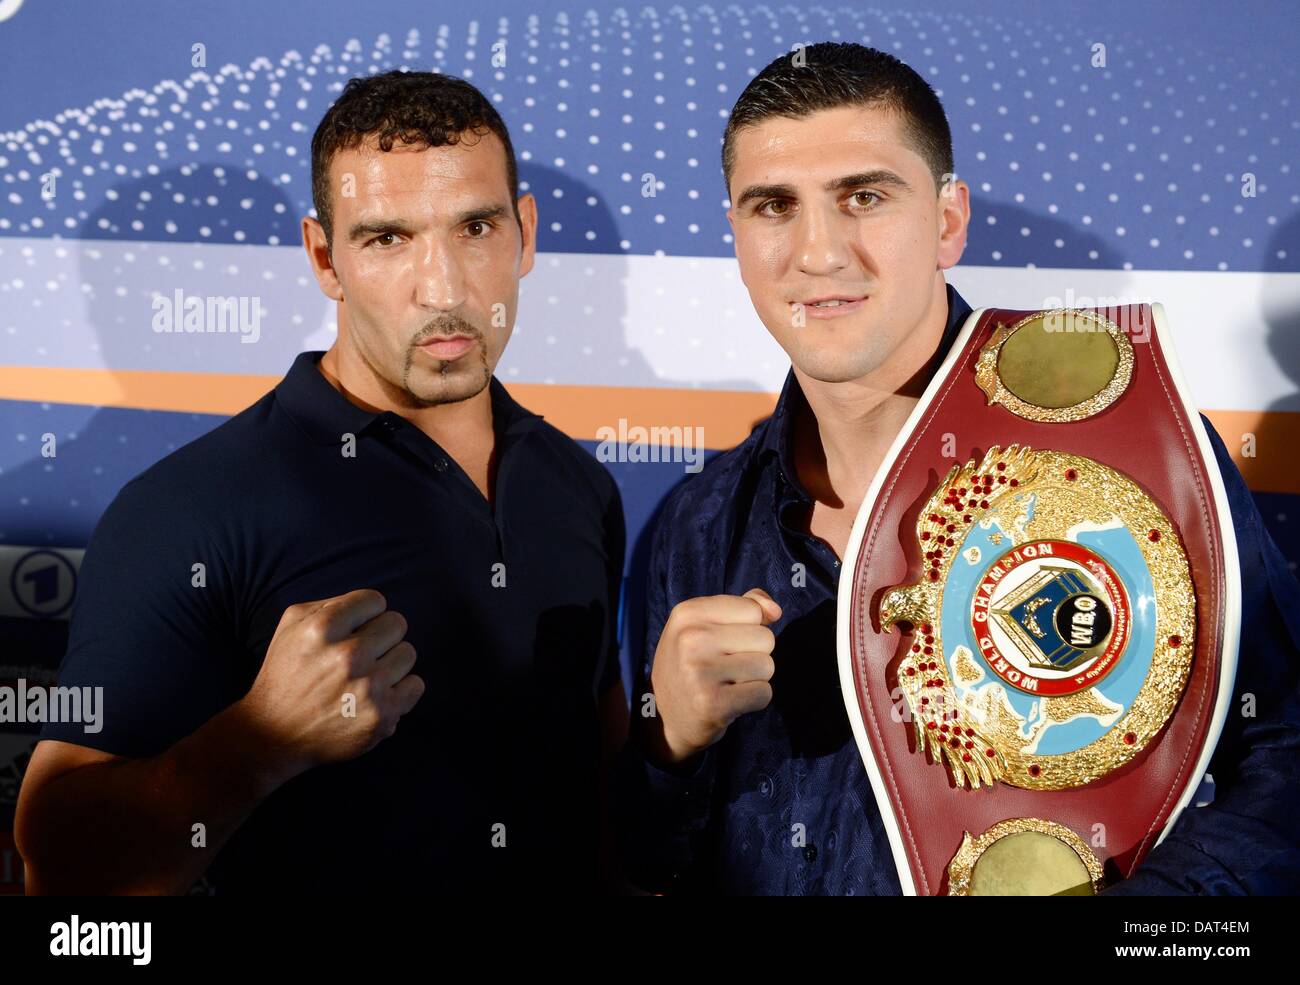 German professional boxers Firat Arslan (L) and Marco Huck (R) stand during a press conference in Schleyer Hall in Stuttgart, Germany, 18 July 2013. Marco Huck will defend his WBO world cruiserweight championship against Firat Arslan on 14 September. Photo: BERND WEISSBROD Stock Photo